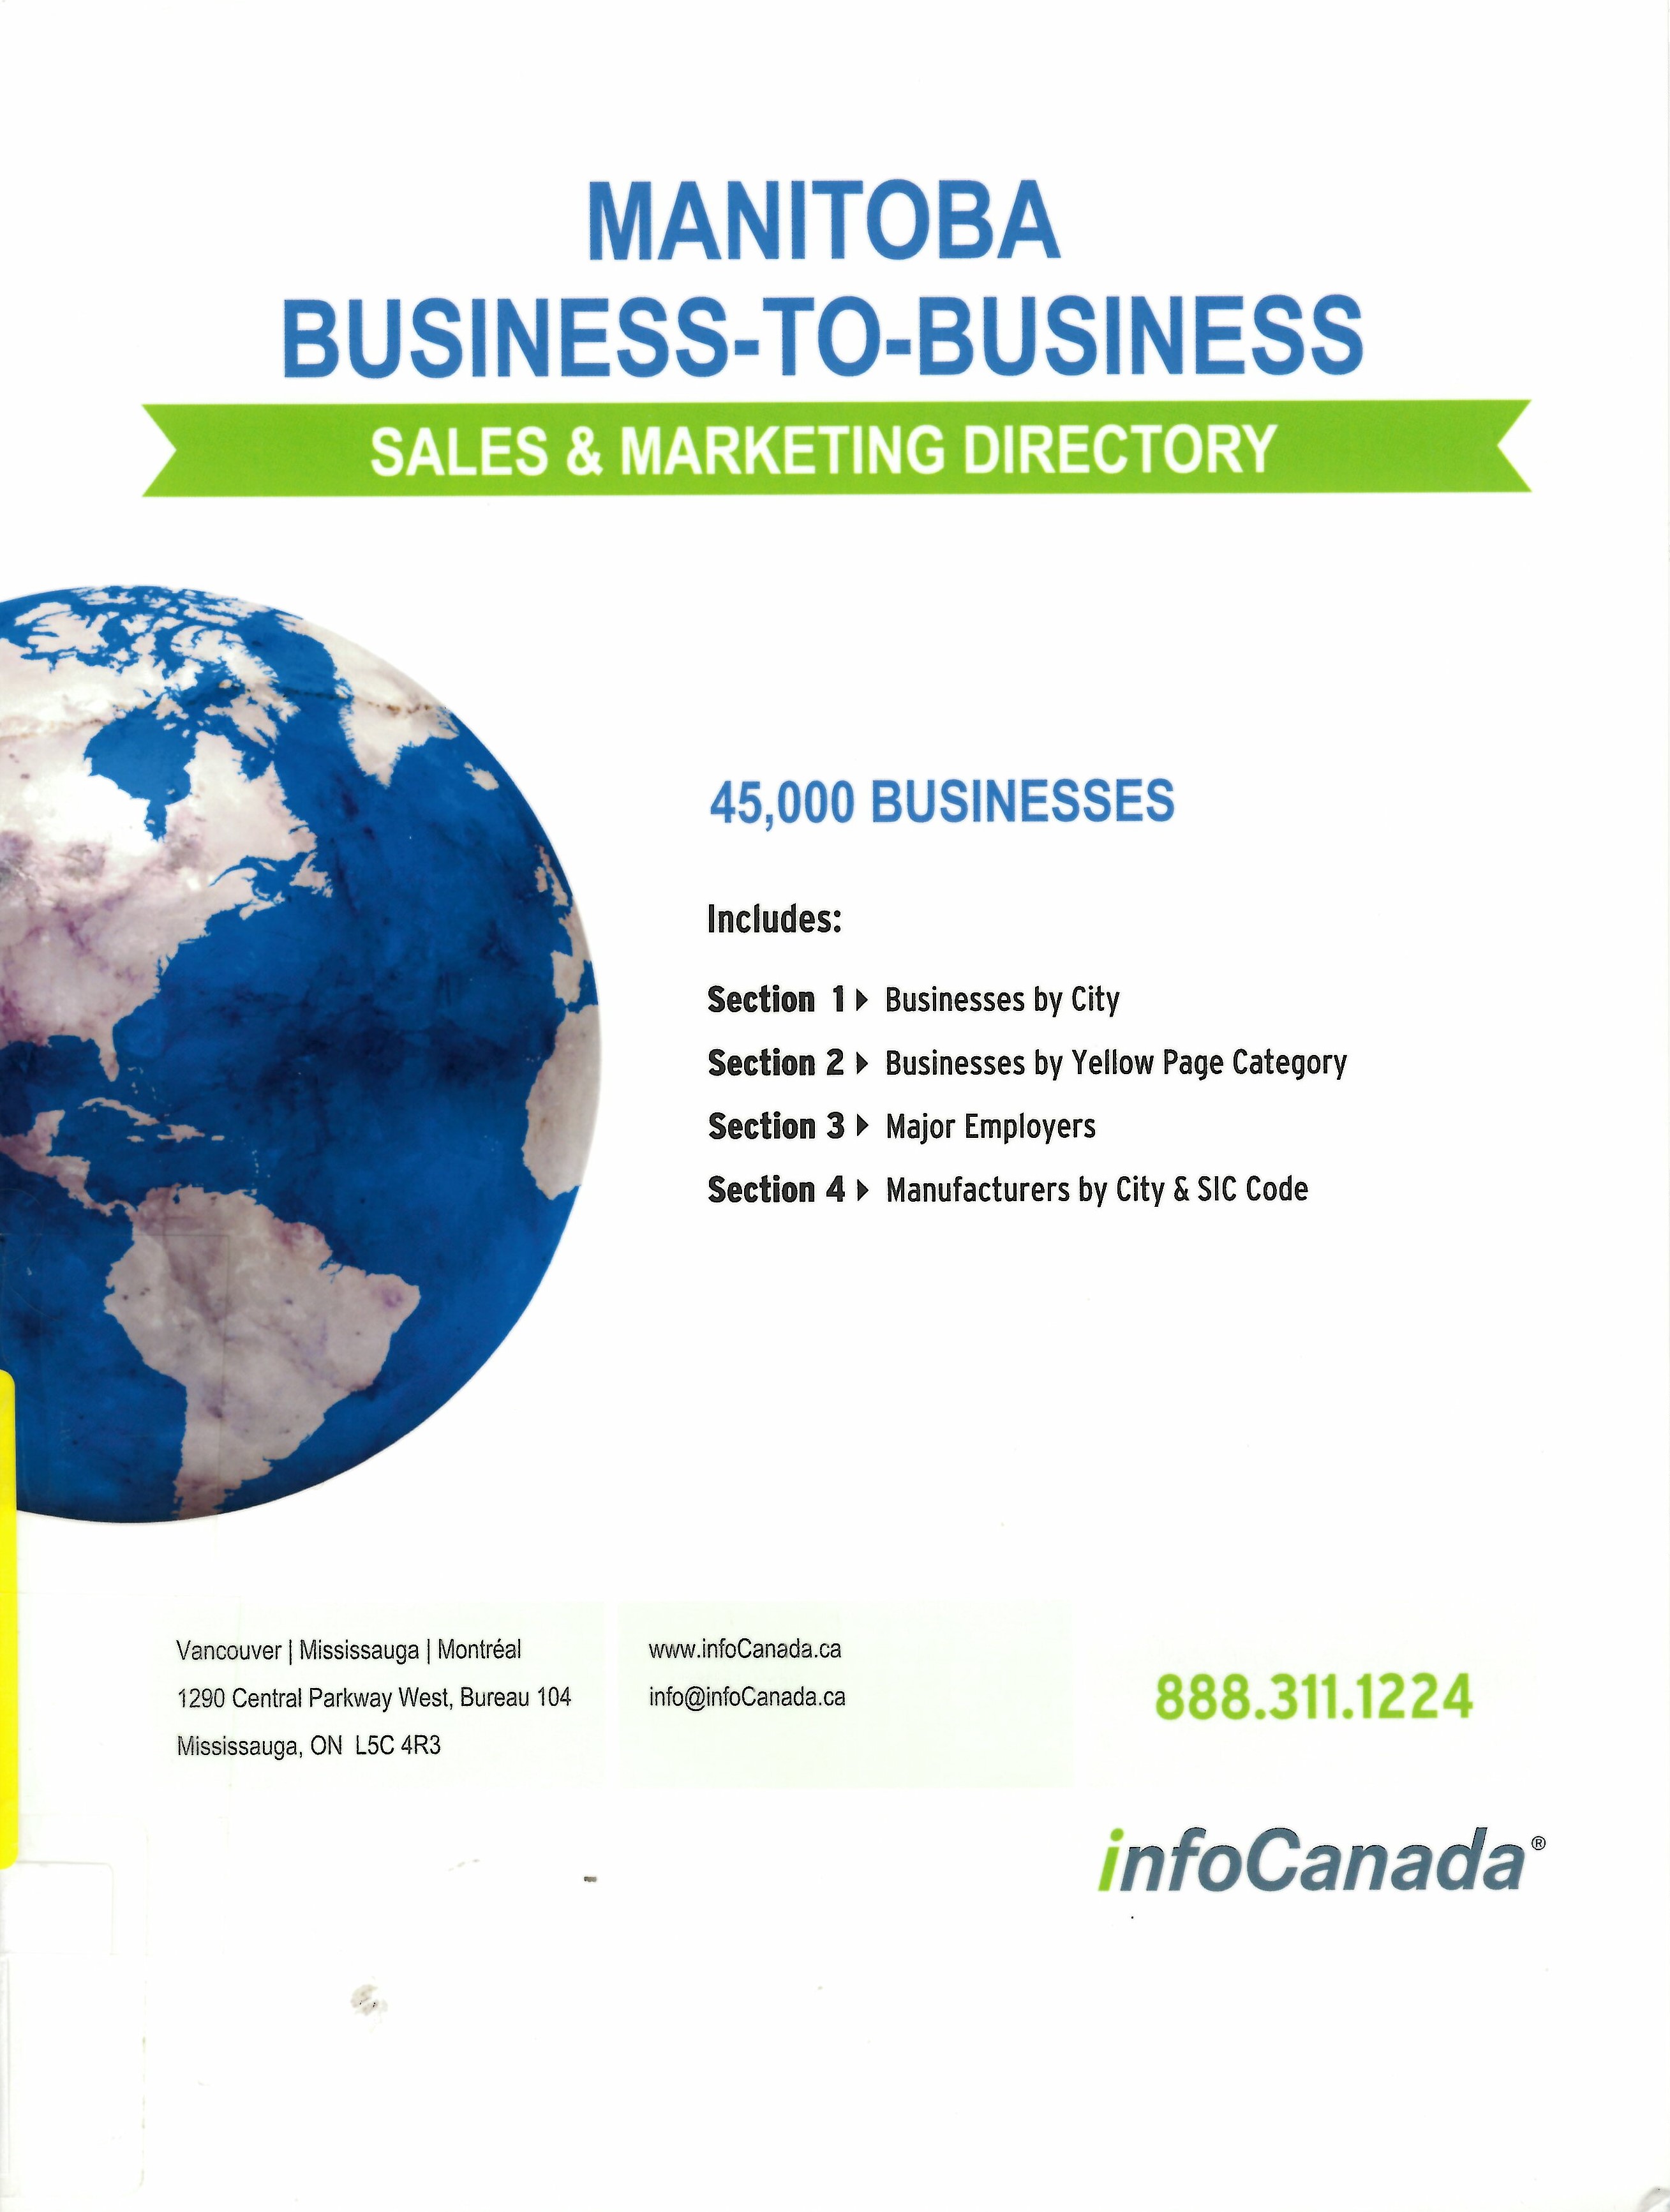 Manitoba business-to-business sales & marketing directory